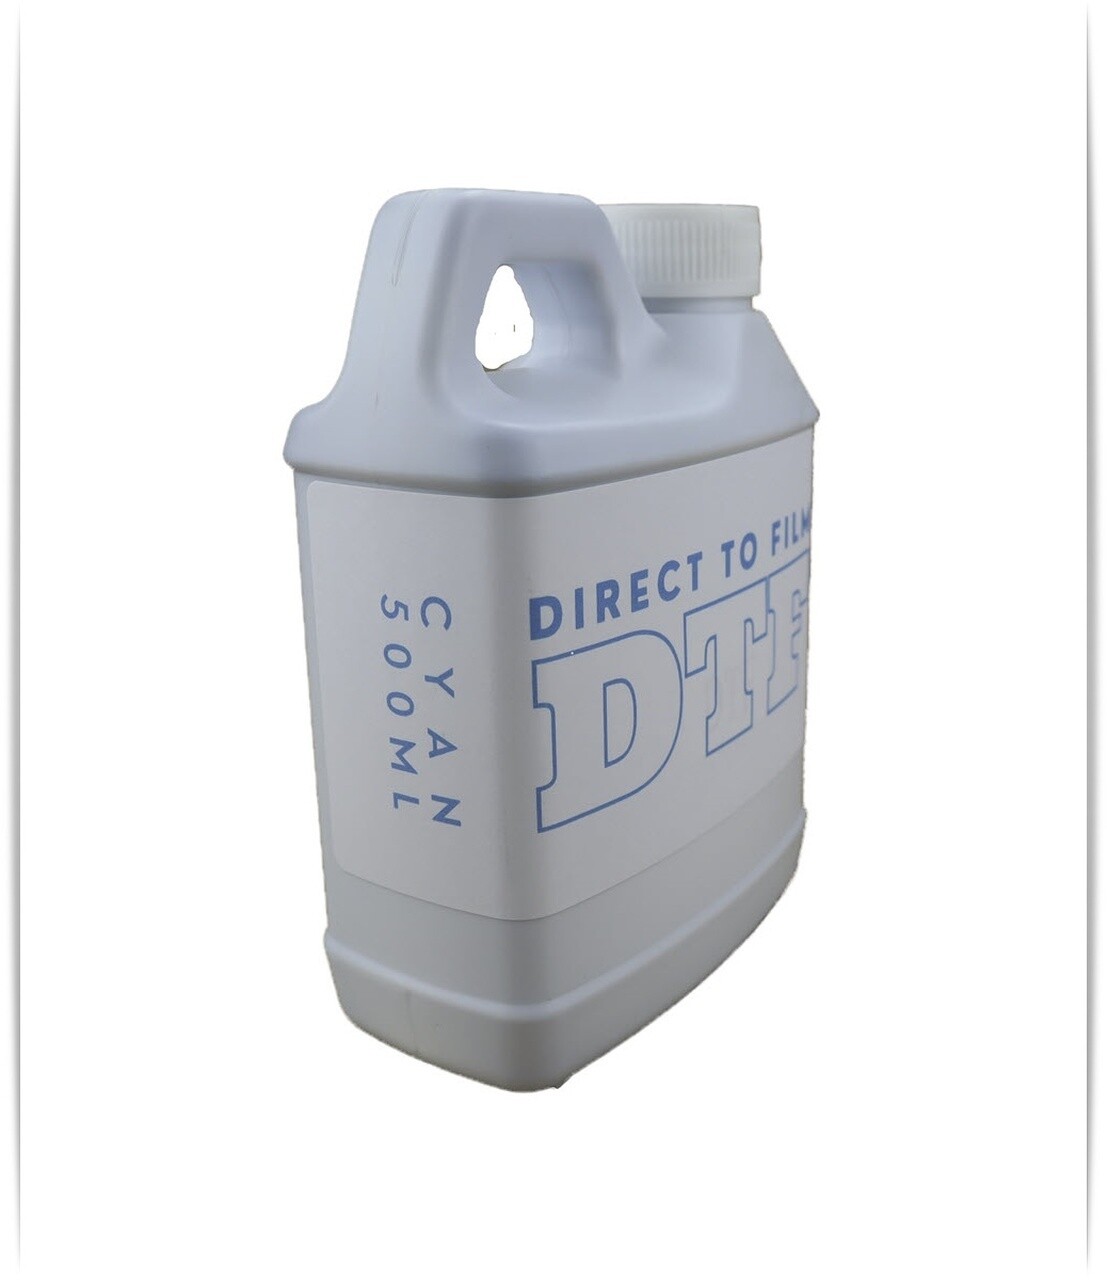 Cyan DTF Ink Direct To Film 500ml Bottle for Epson, Epson Print Head printers